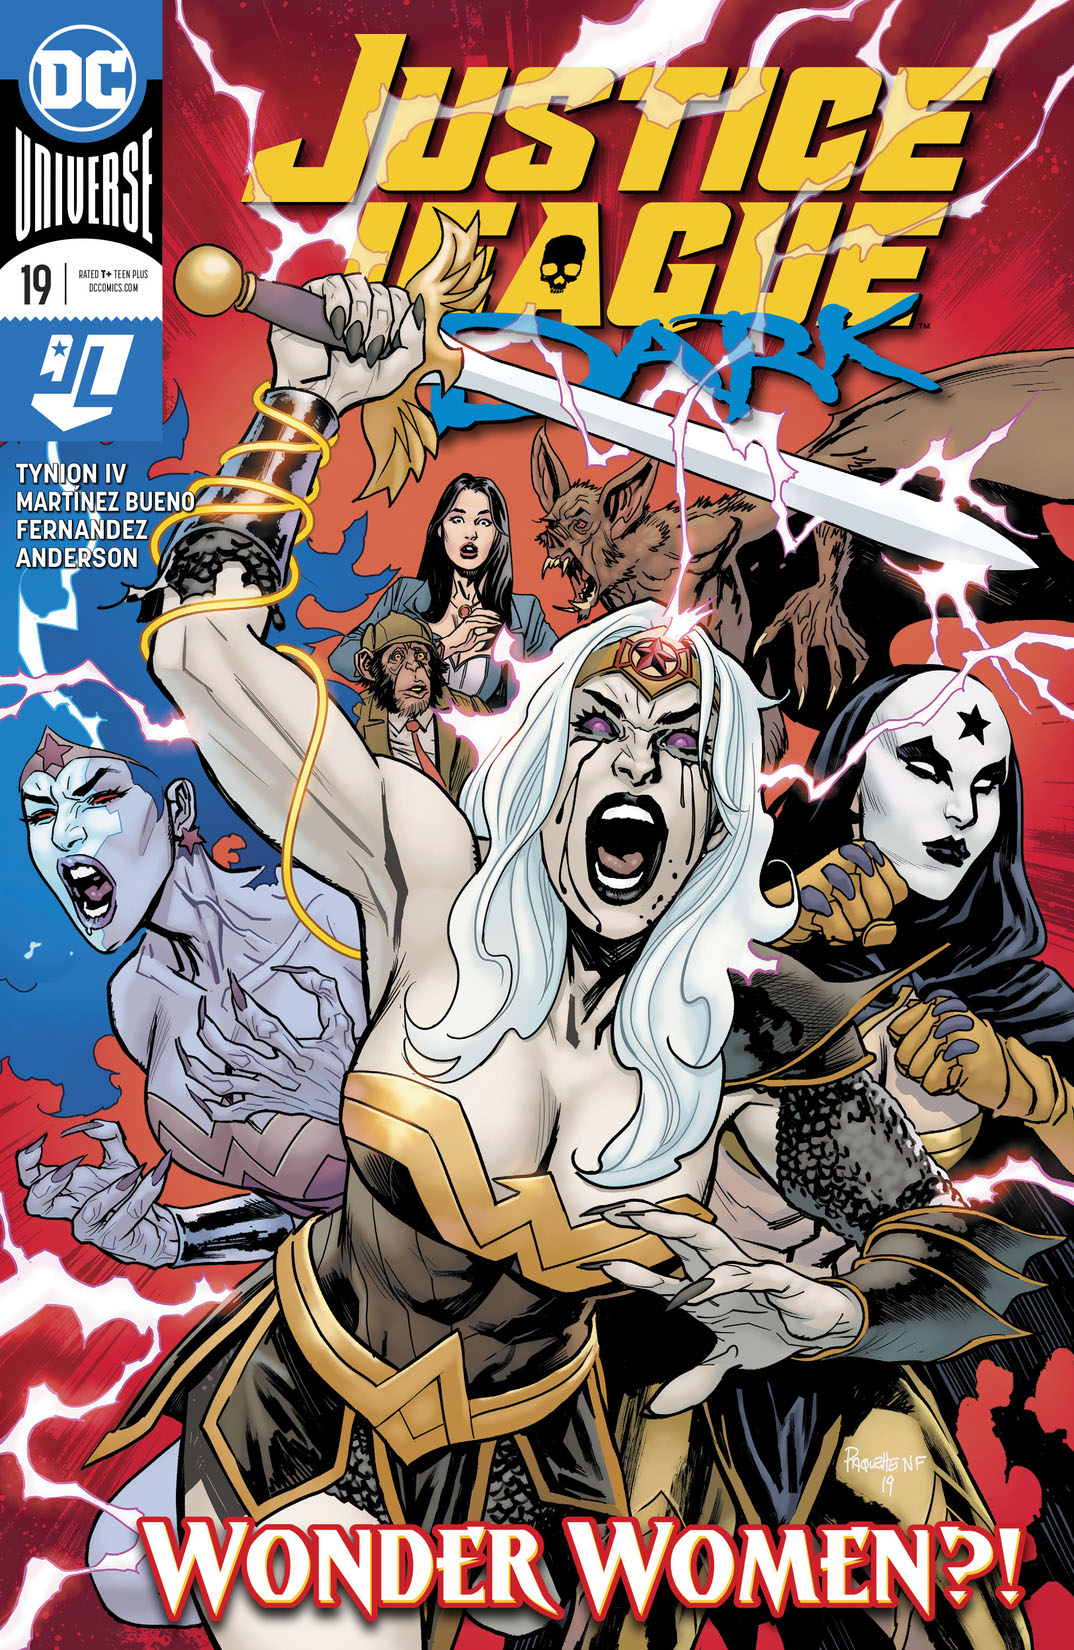 Justice League Dark (2018-) #19 preview images